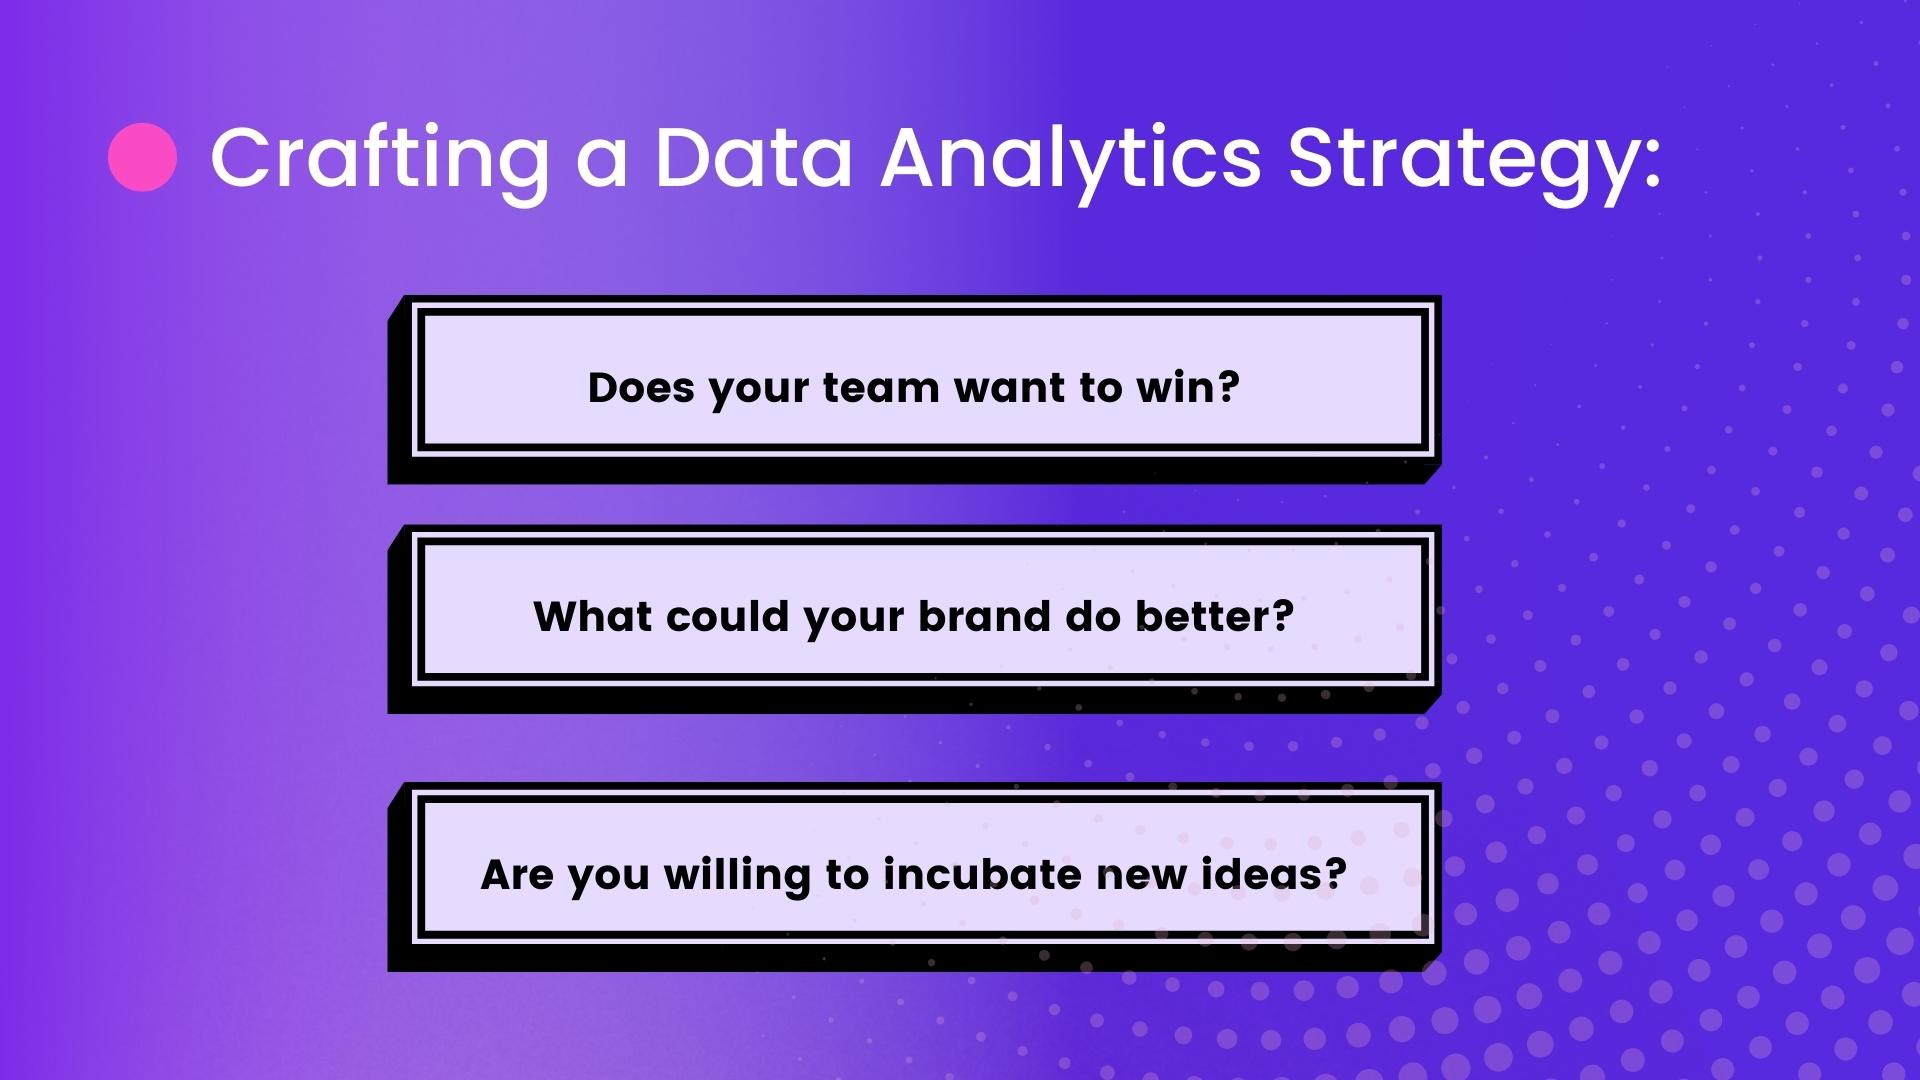 The questions to ask when creating a data analytics for eCommerce strategy